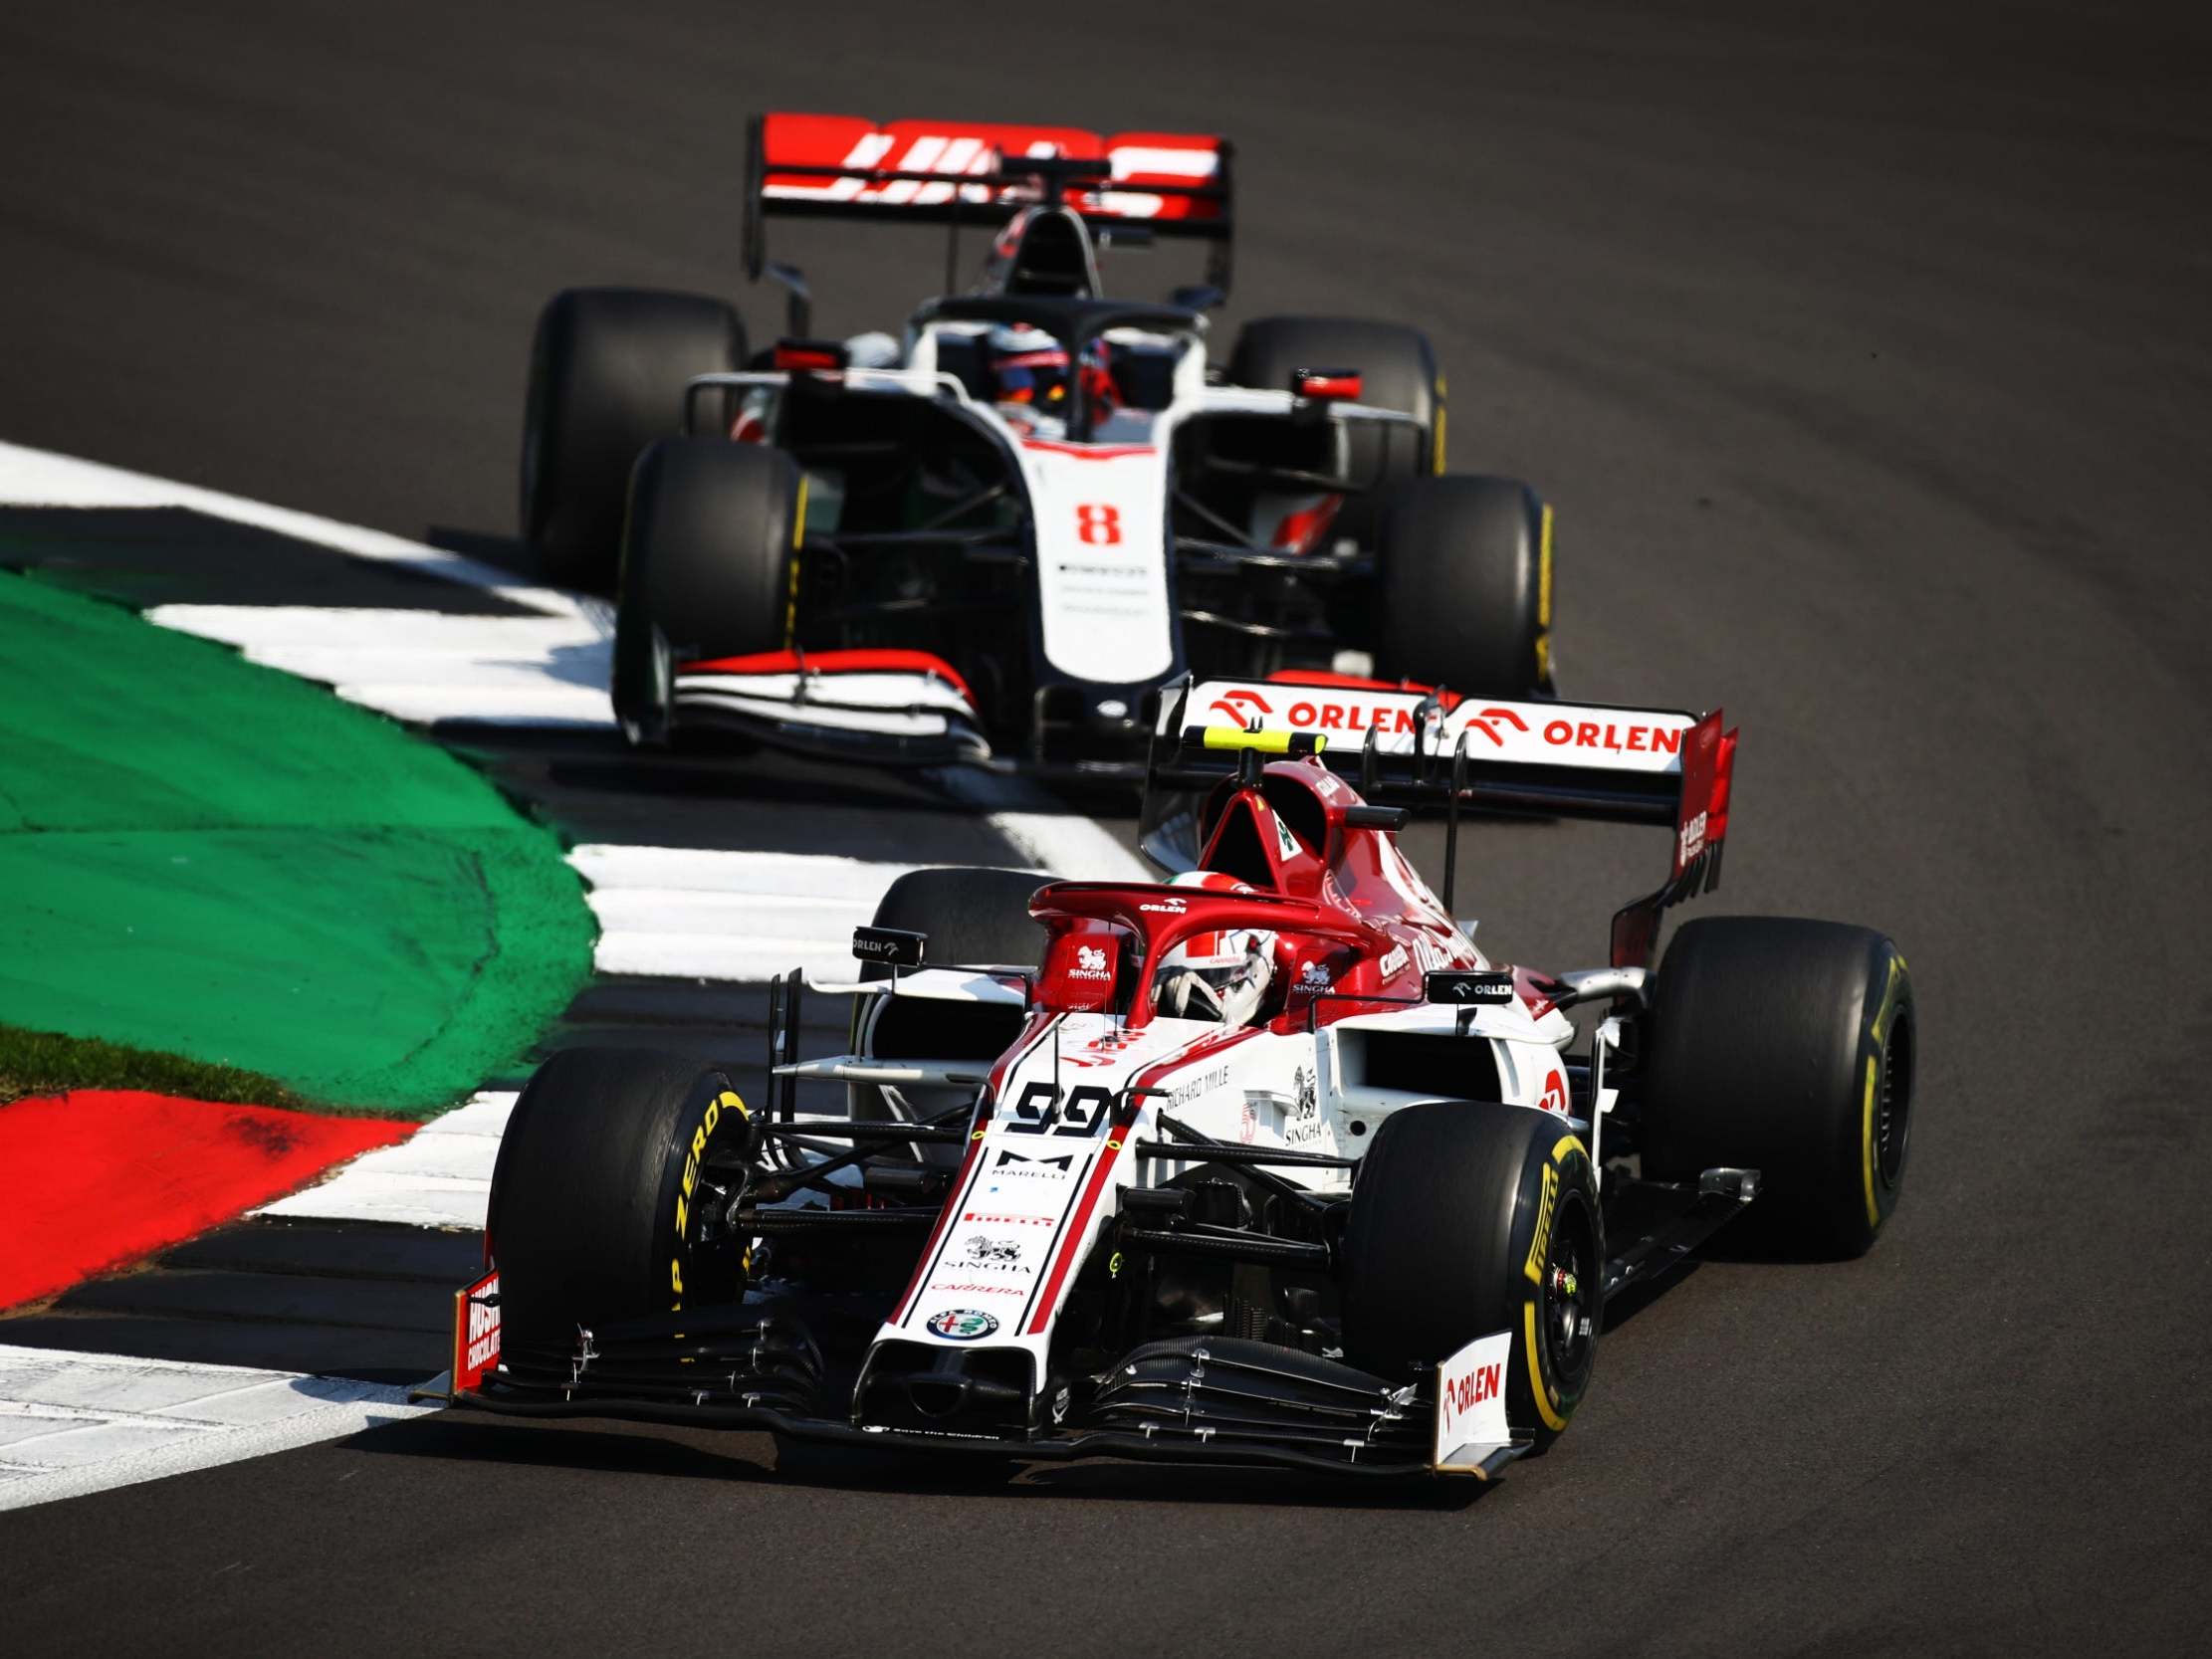 Romain Grosjean (back) drove impressively in both qualifying and race for a solid weekend